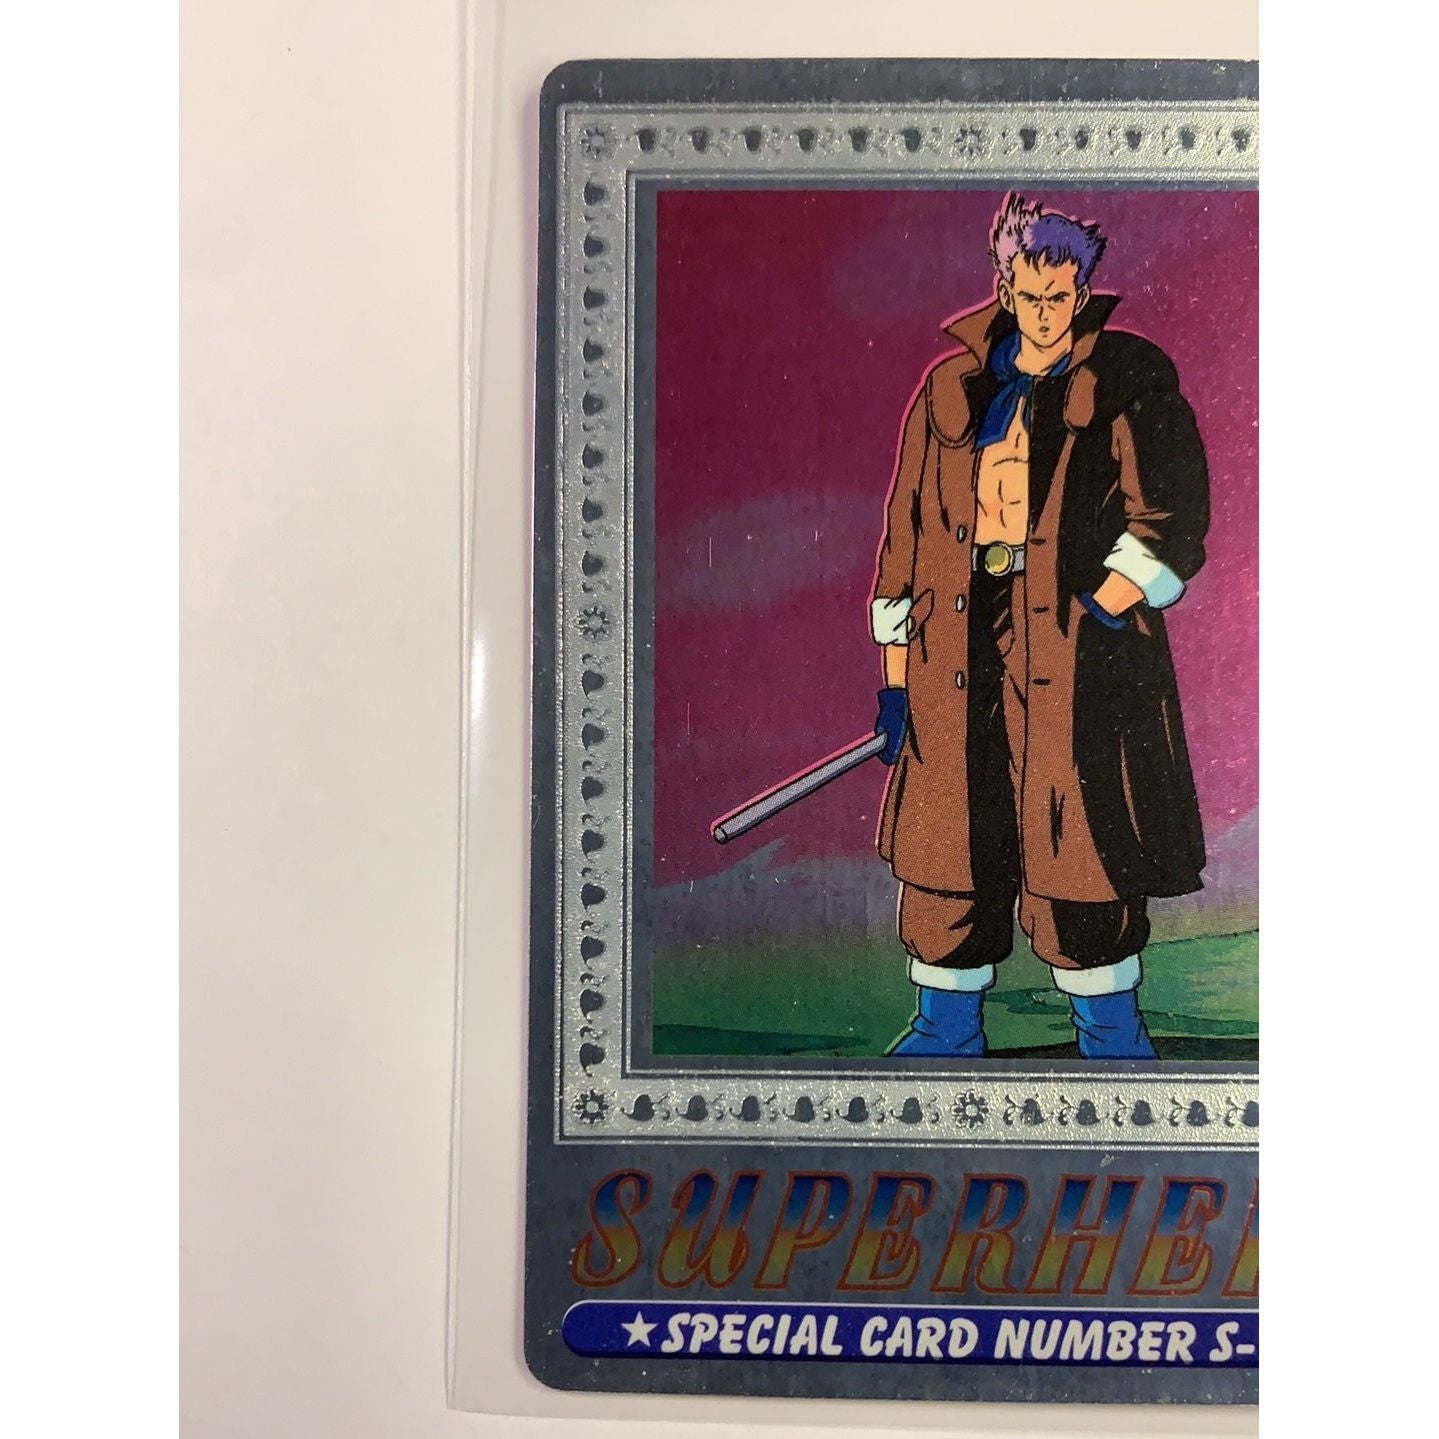  1995 Cardass Adali Super Hero Special Card S-93 Silver Foil  Local Legends Cards & Collectibles